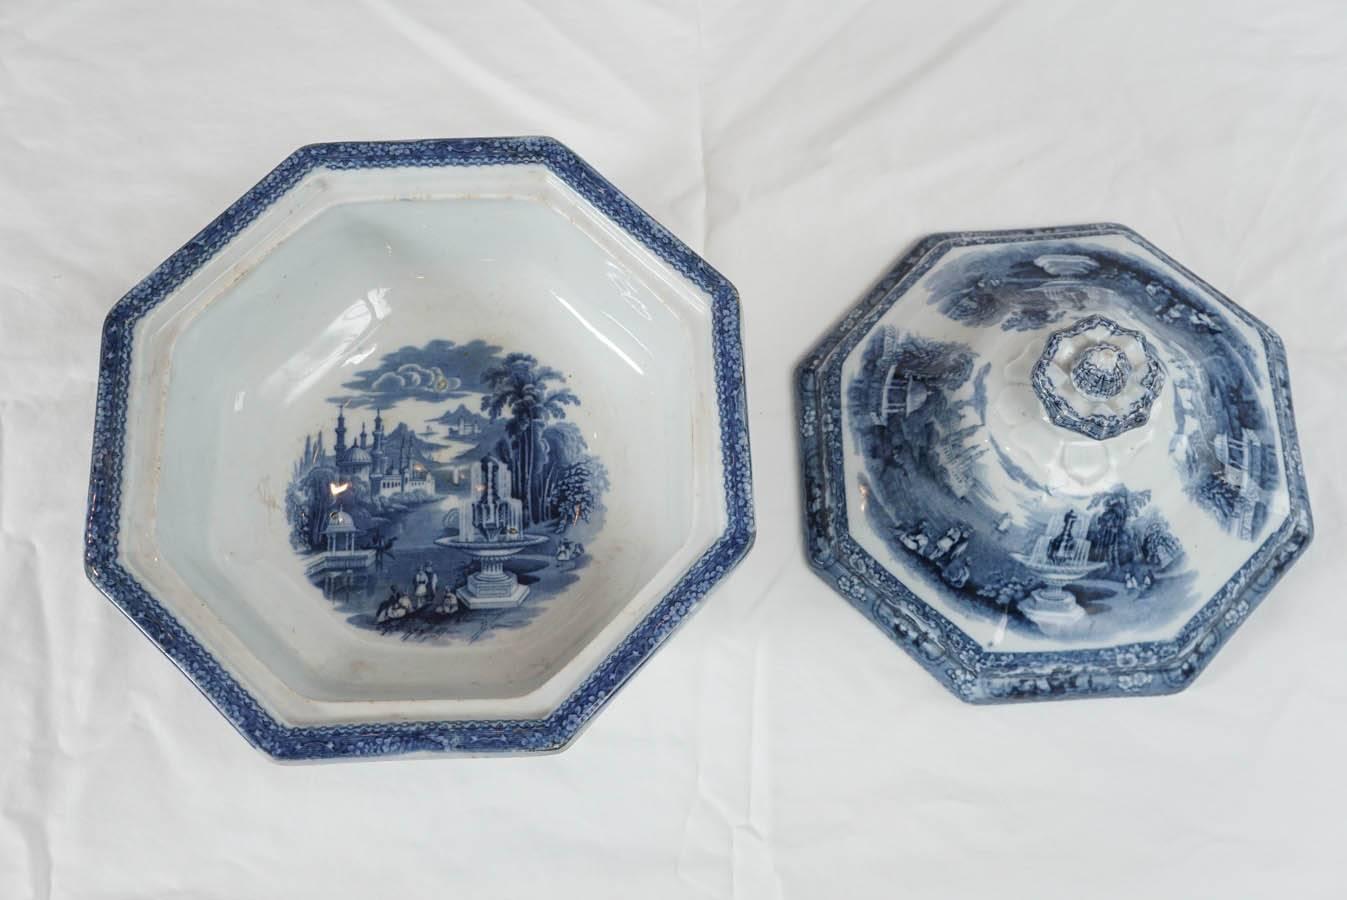 English Staffordshire Blue & White Transfer Decorated Covered Bowl/Tureen, 19th Century